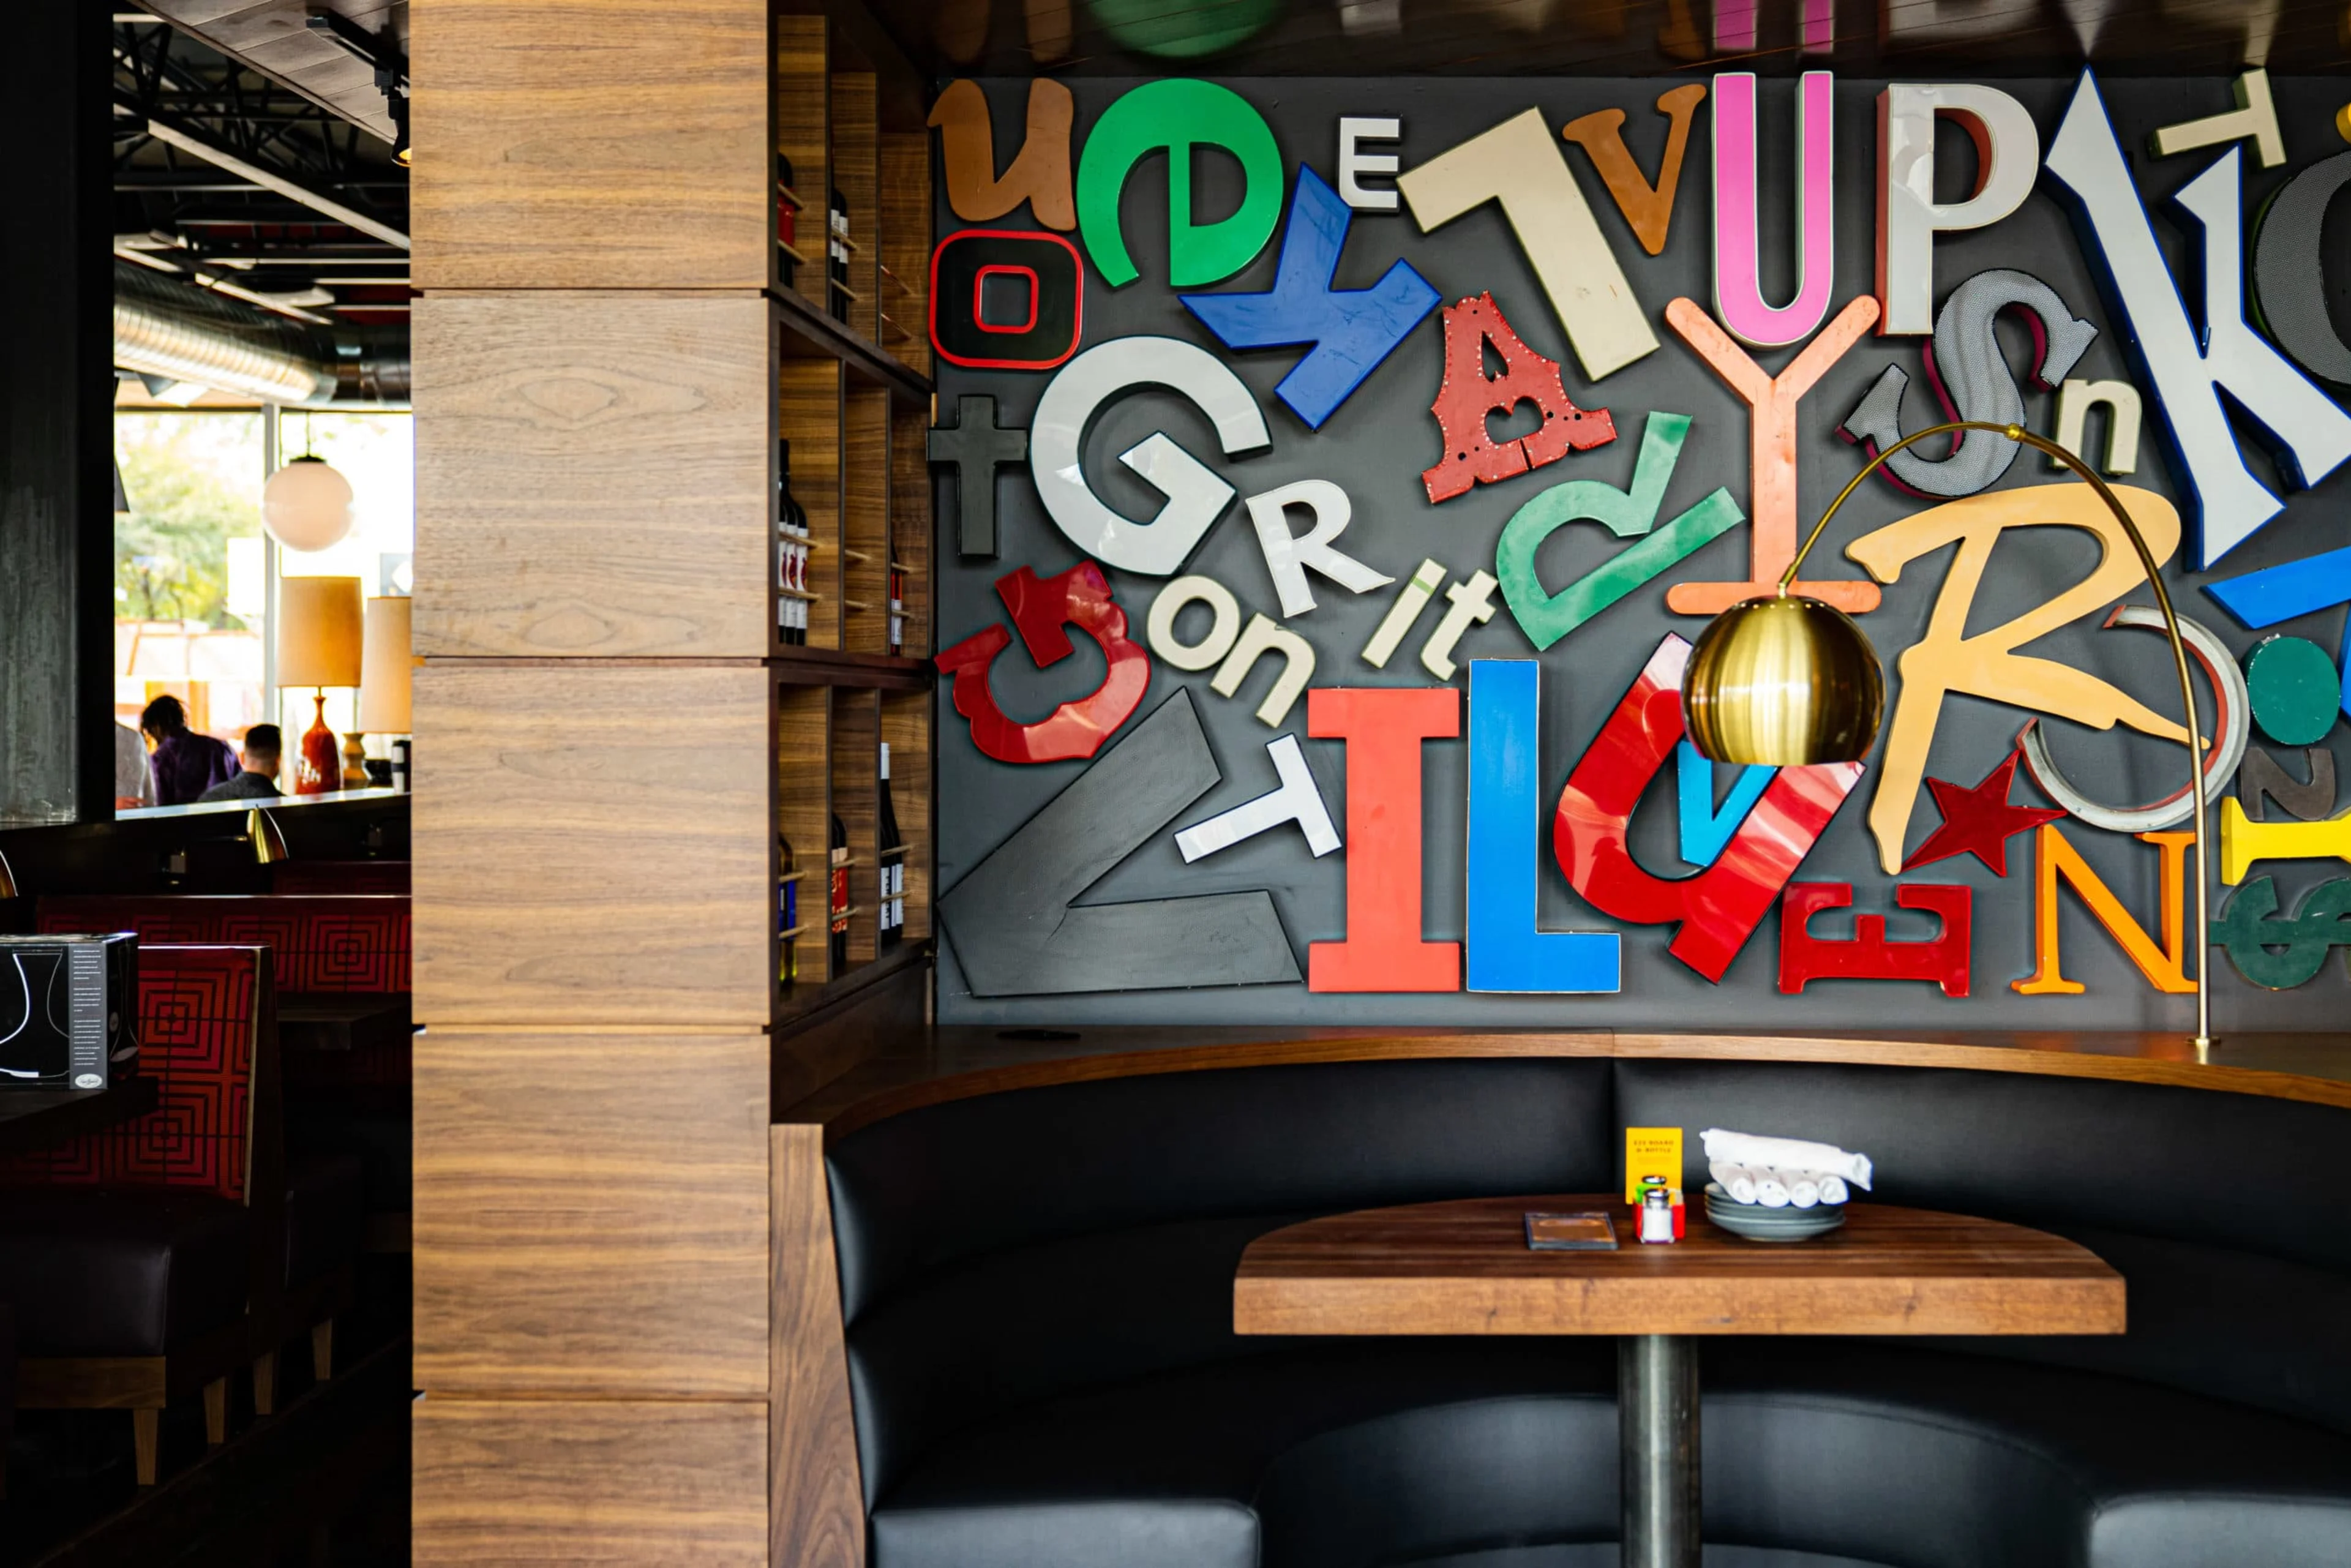 A booth table with large colorful letters on the wall behind it.